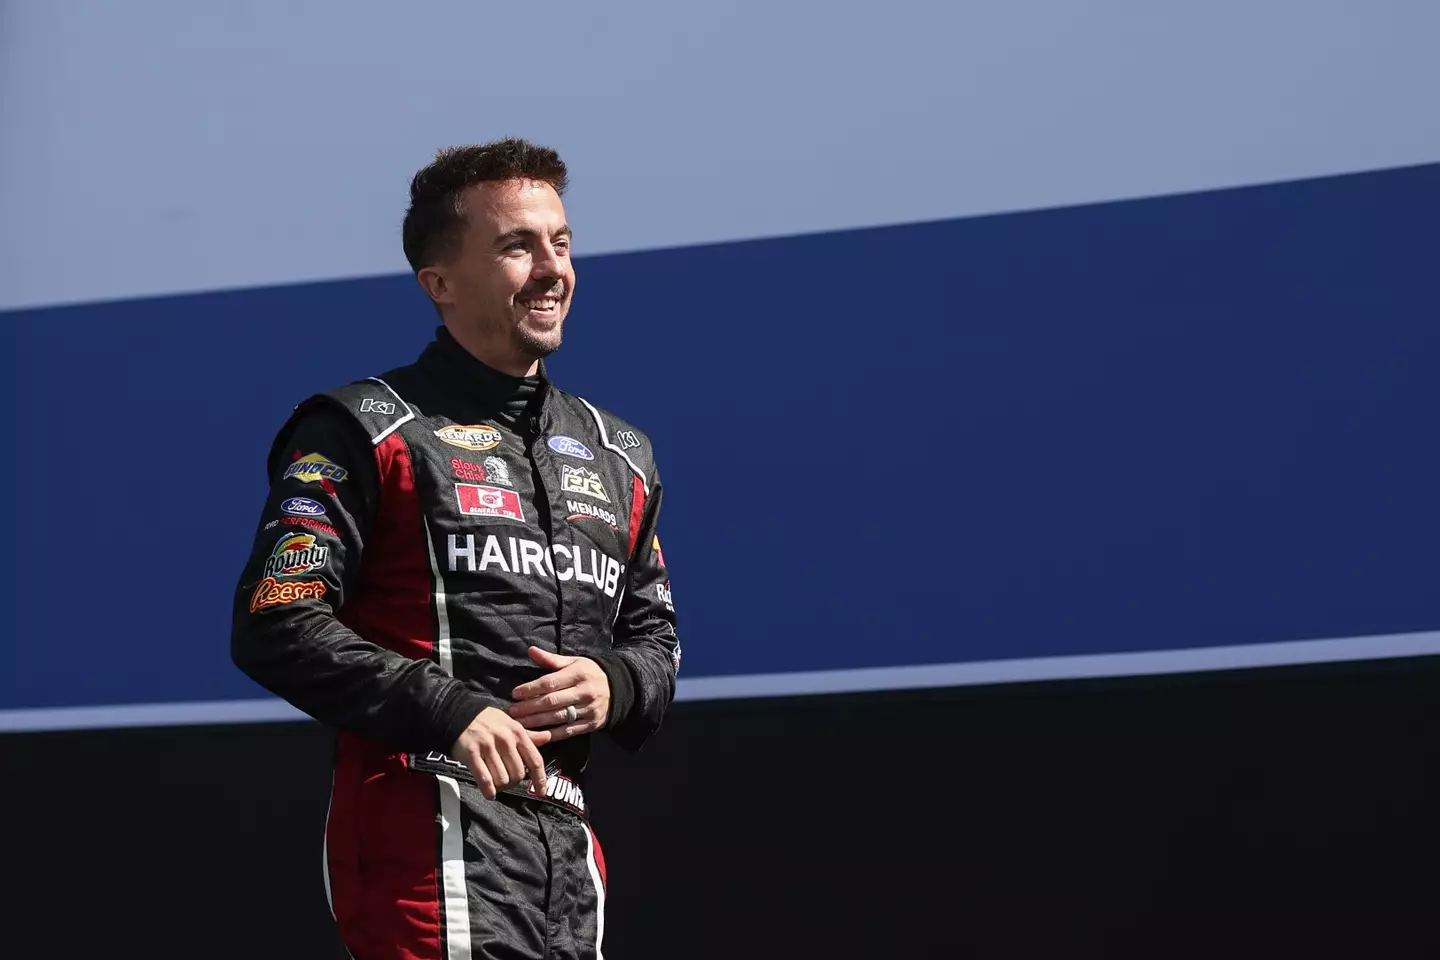 Frankie Muniz, now a successful racing driver, does remember making Malcolm in the Middle.